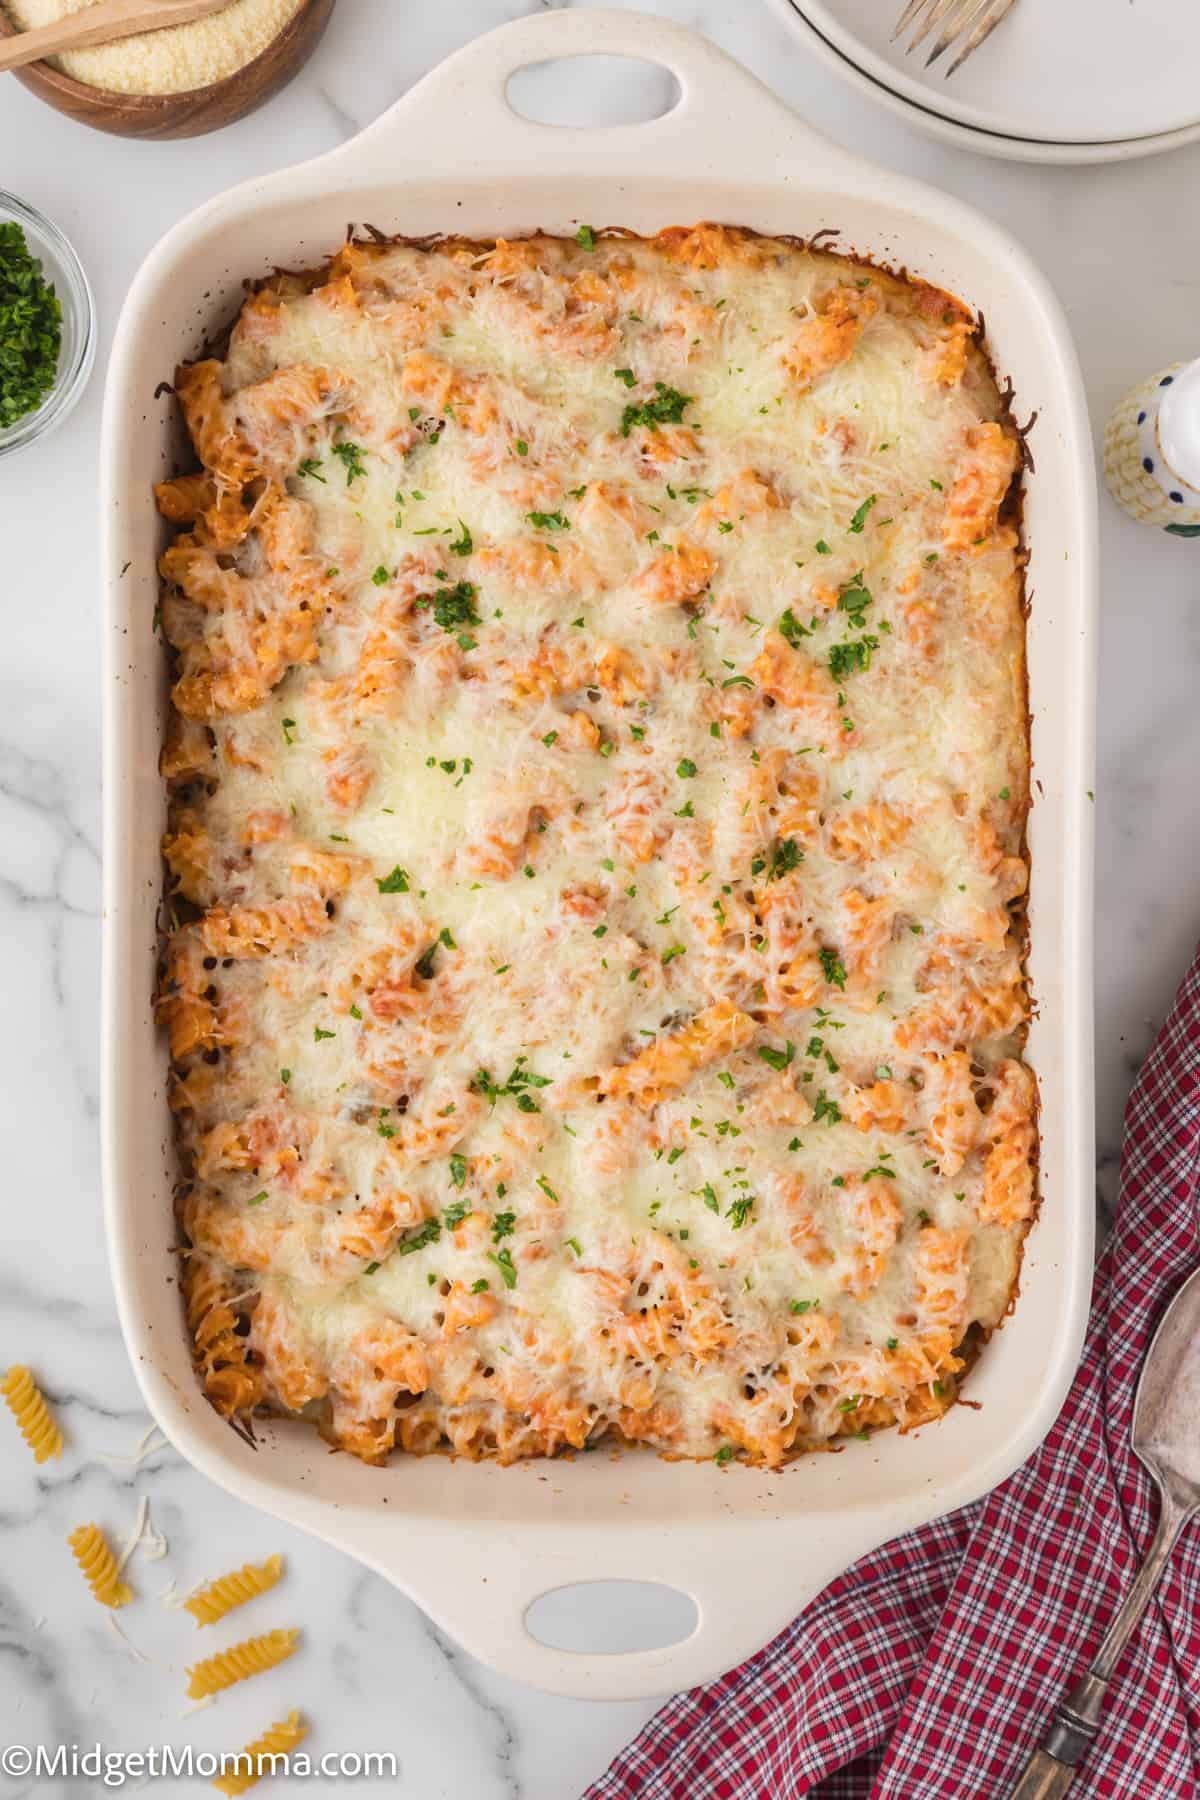 A homemade pink sauce pasta casserole topped with melted mozzarella cheese and garnished with herbs in a white baking dish.